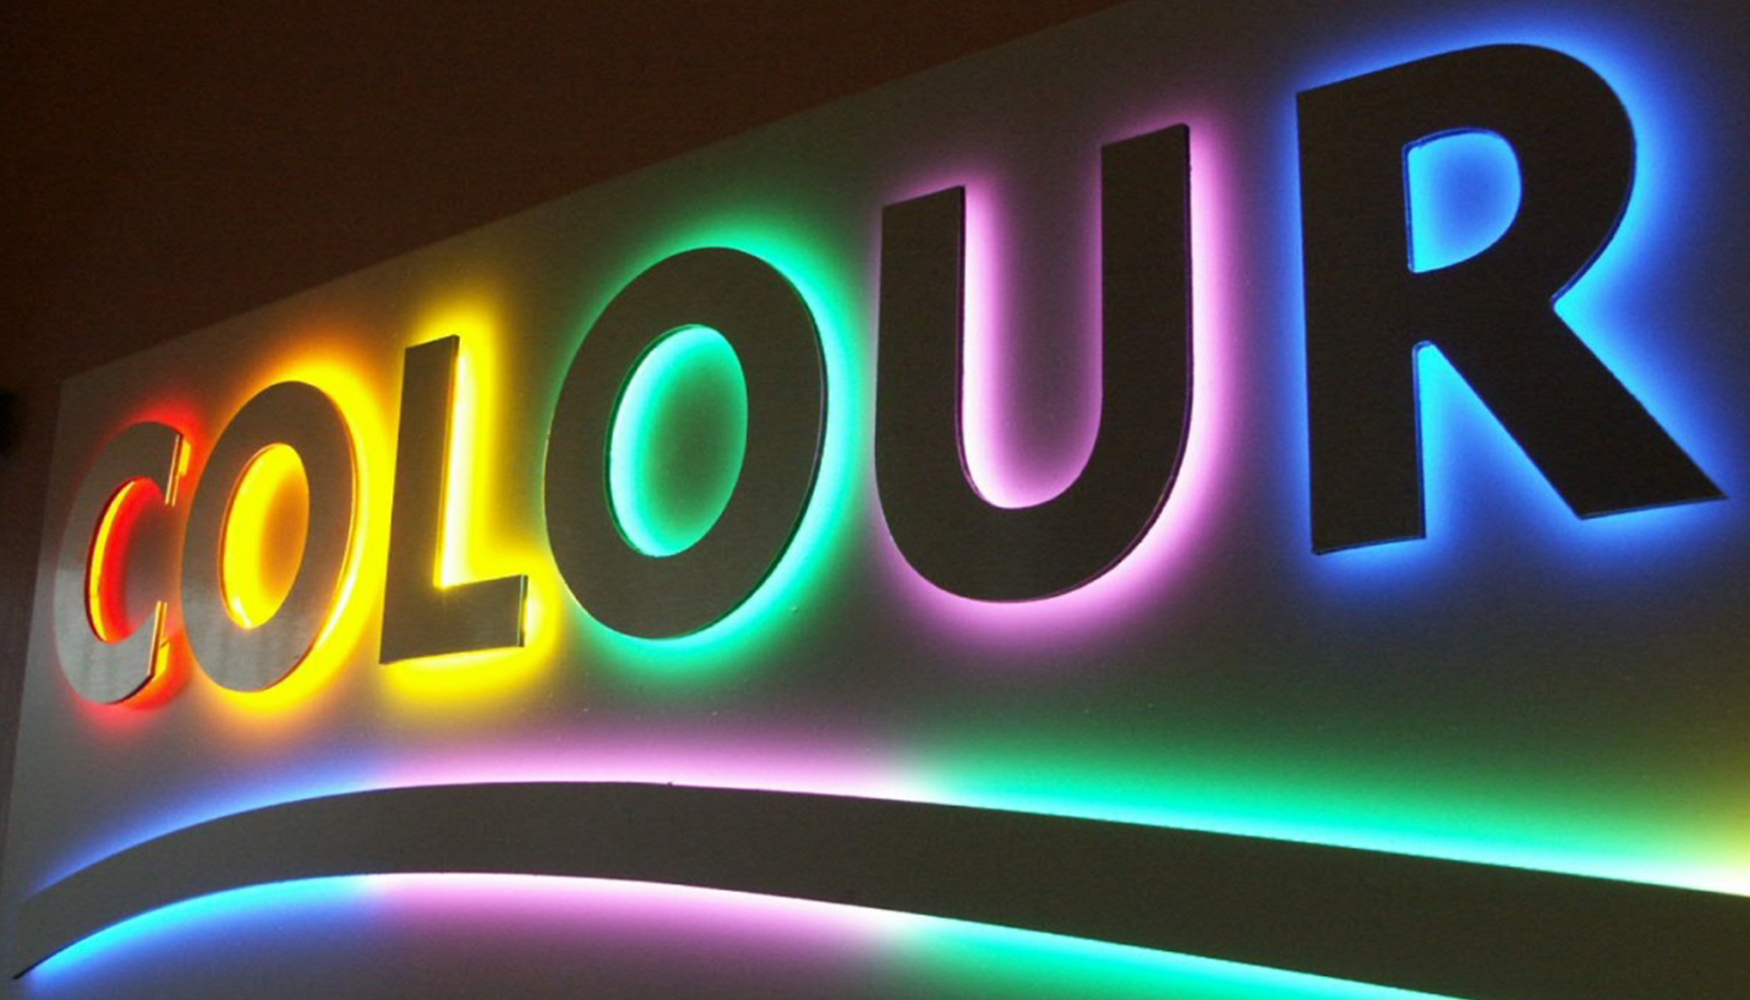 LED Business Signage: Why is it a Good Investment?